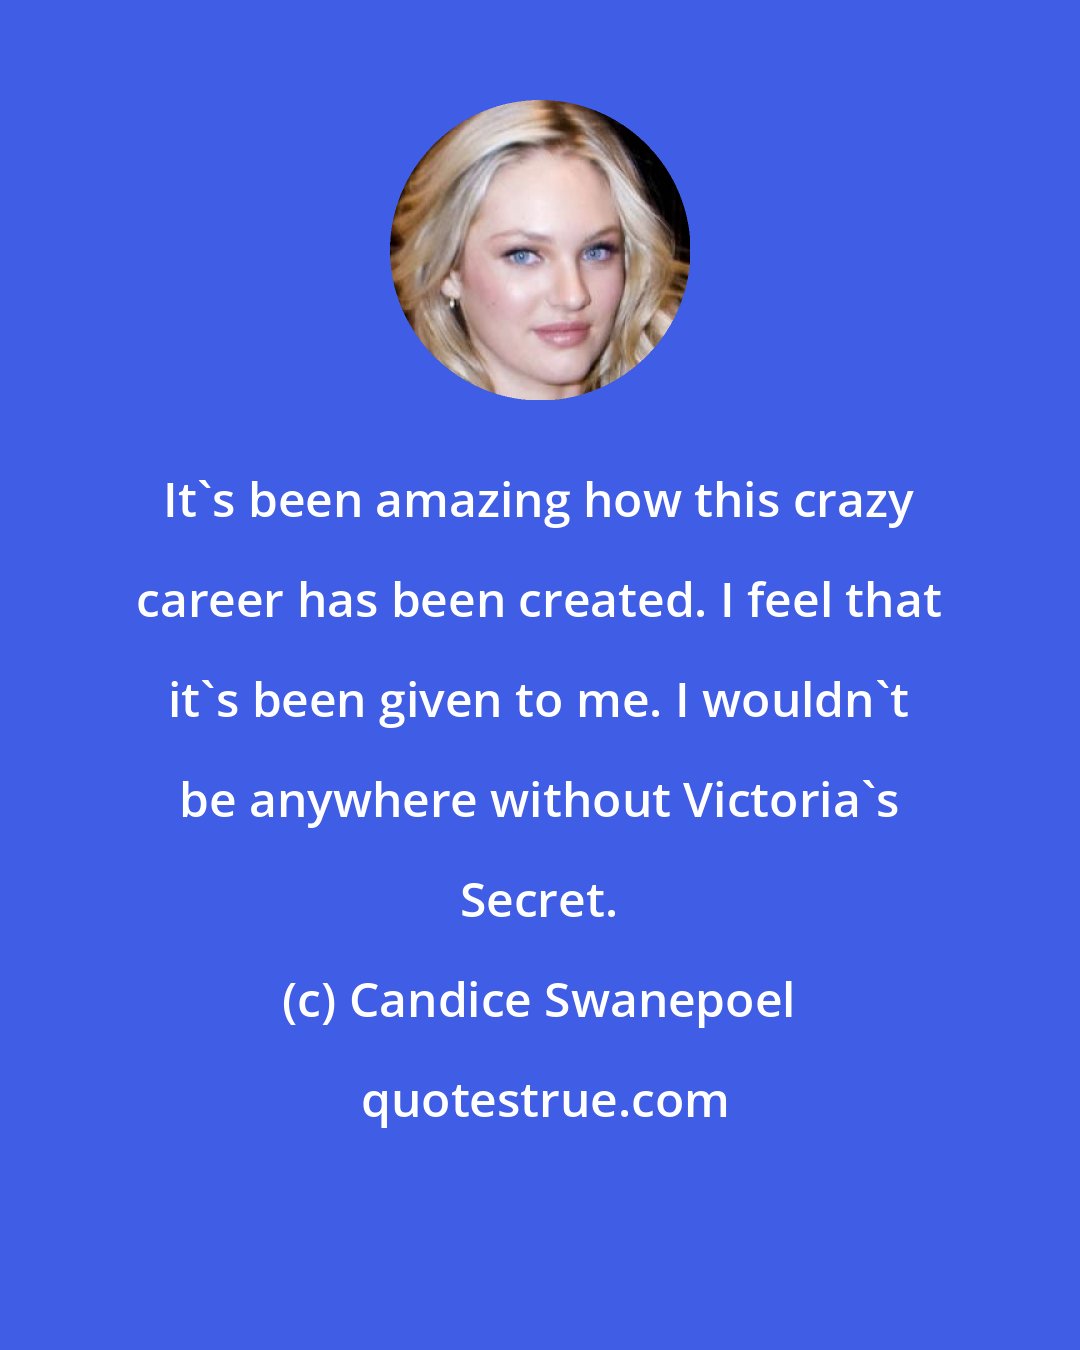 Candice Swanepoel: It's been amazing how this crazy career has been created. I feel that it's been given to me. I wouldn't be anywhere without Victoria's Secret.